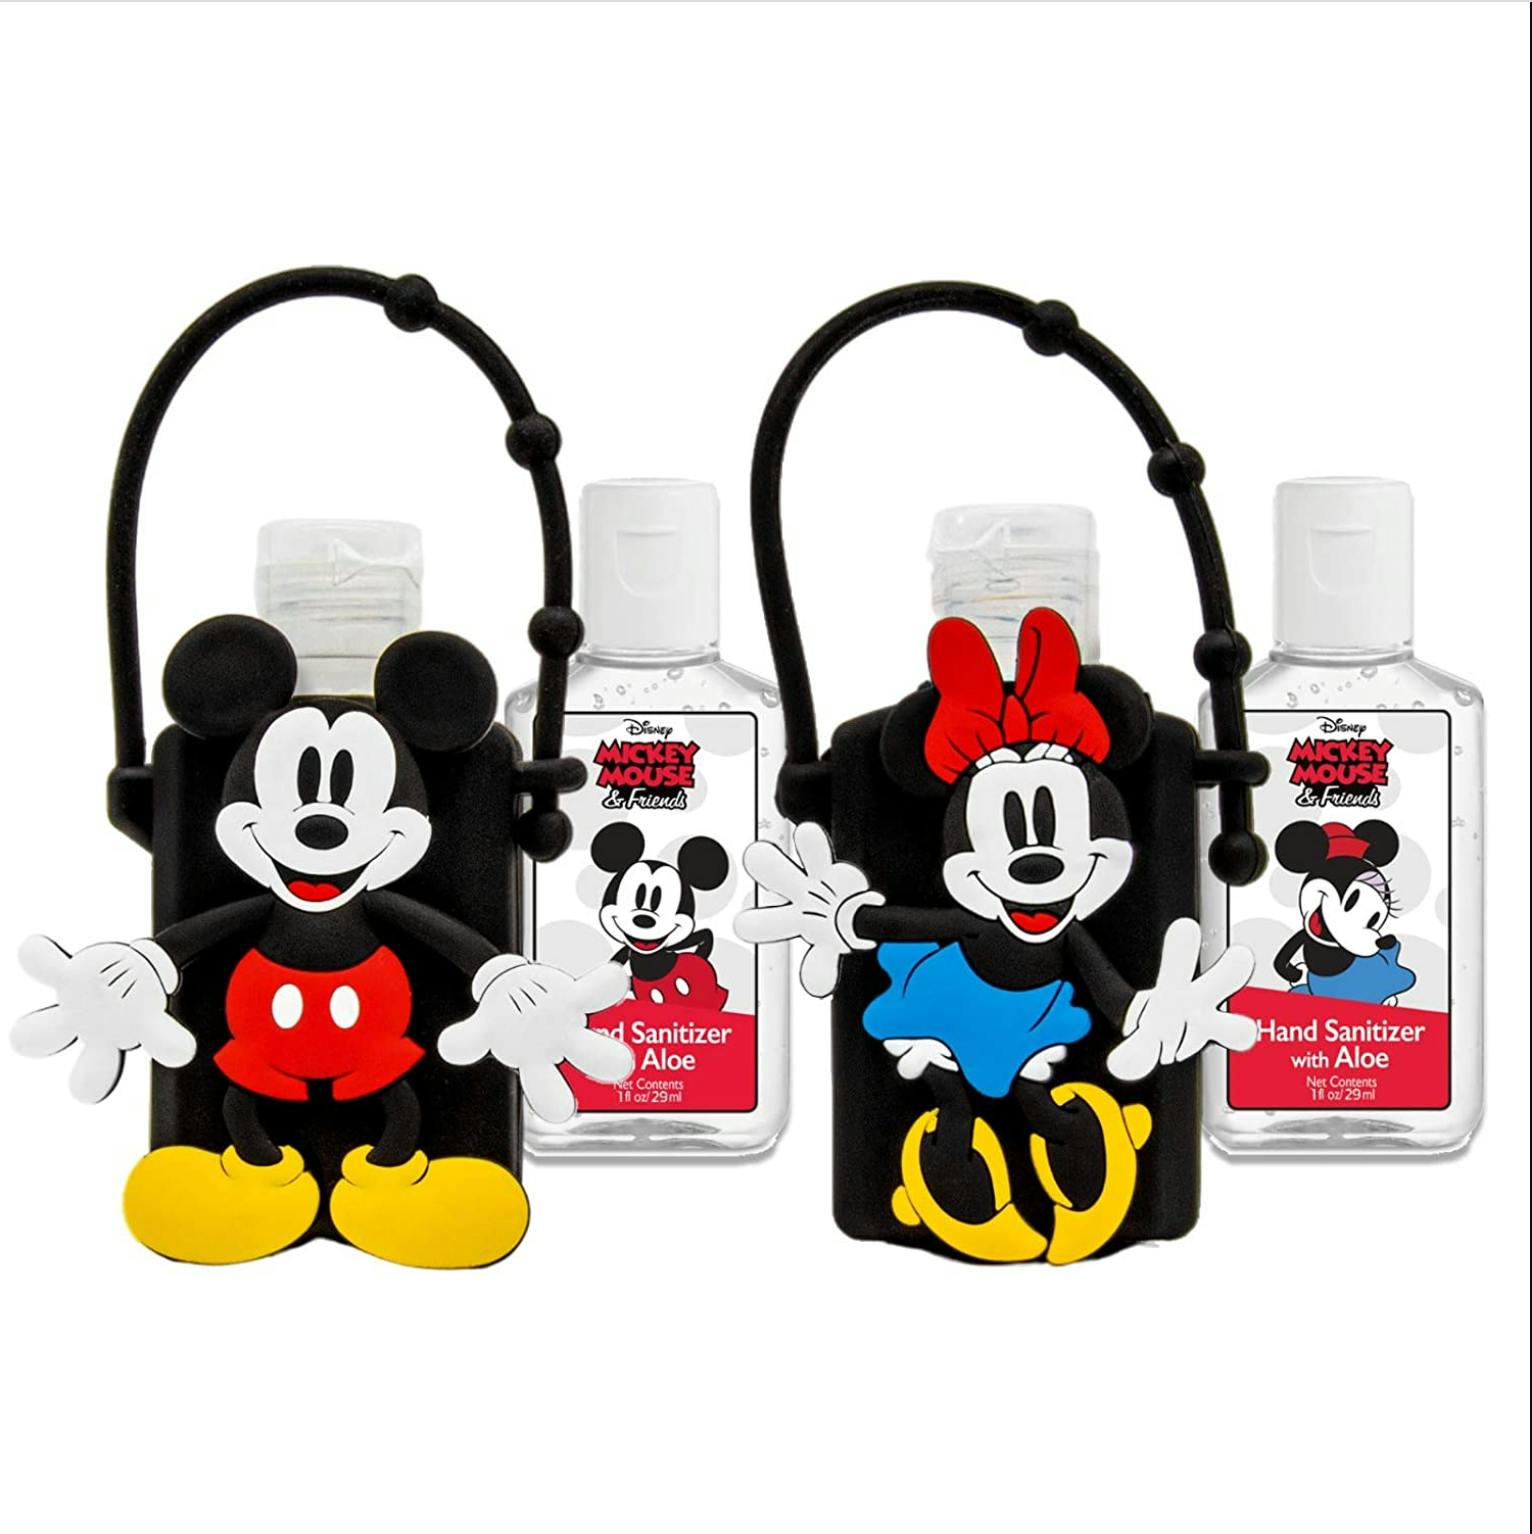 X 2 Disney Minnie Mouse Drinks Flask Dispenser With Straw And Lanyard 